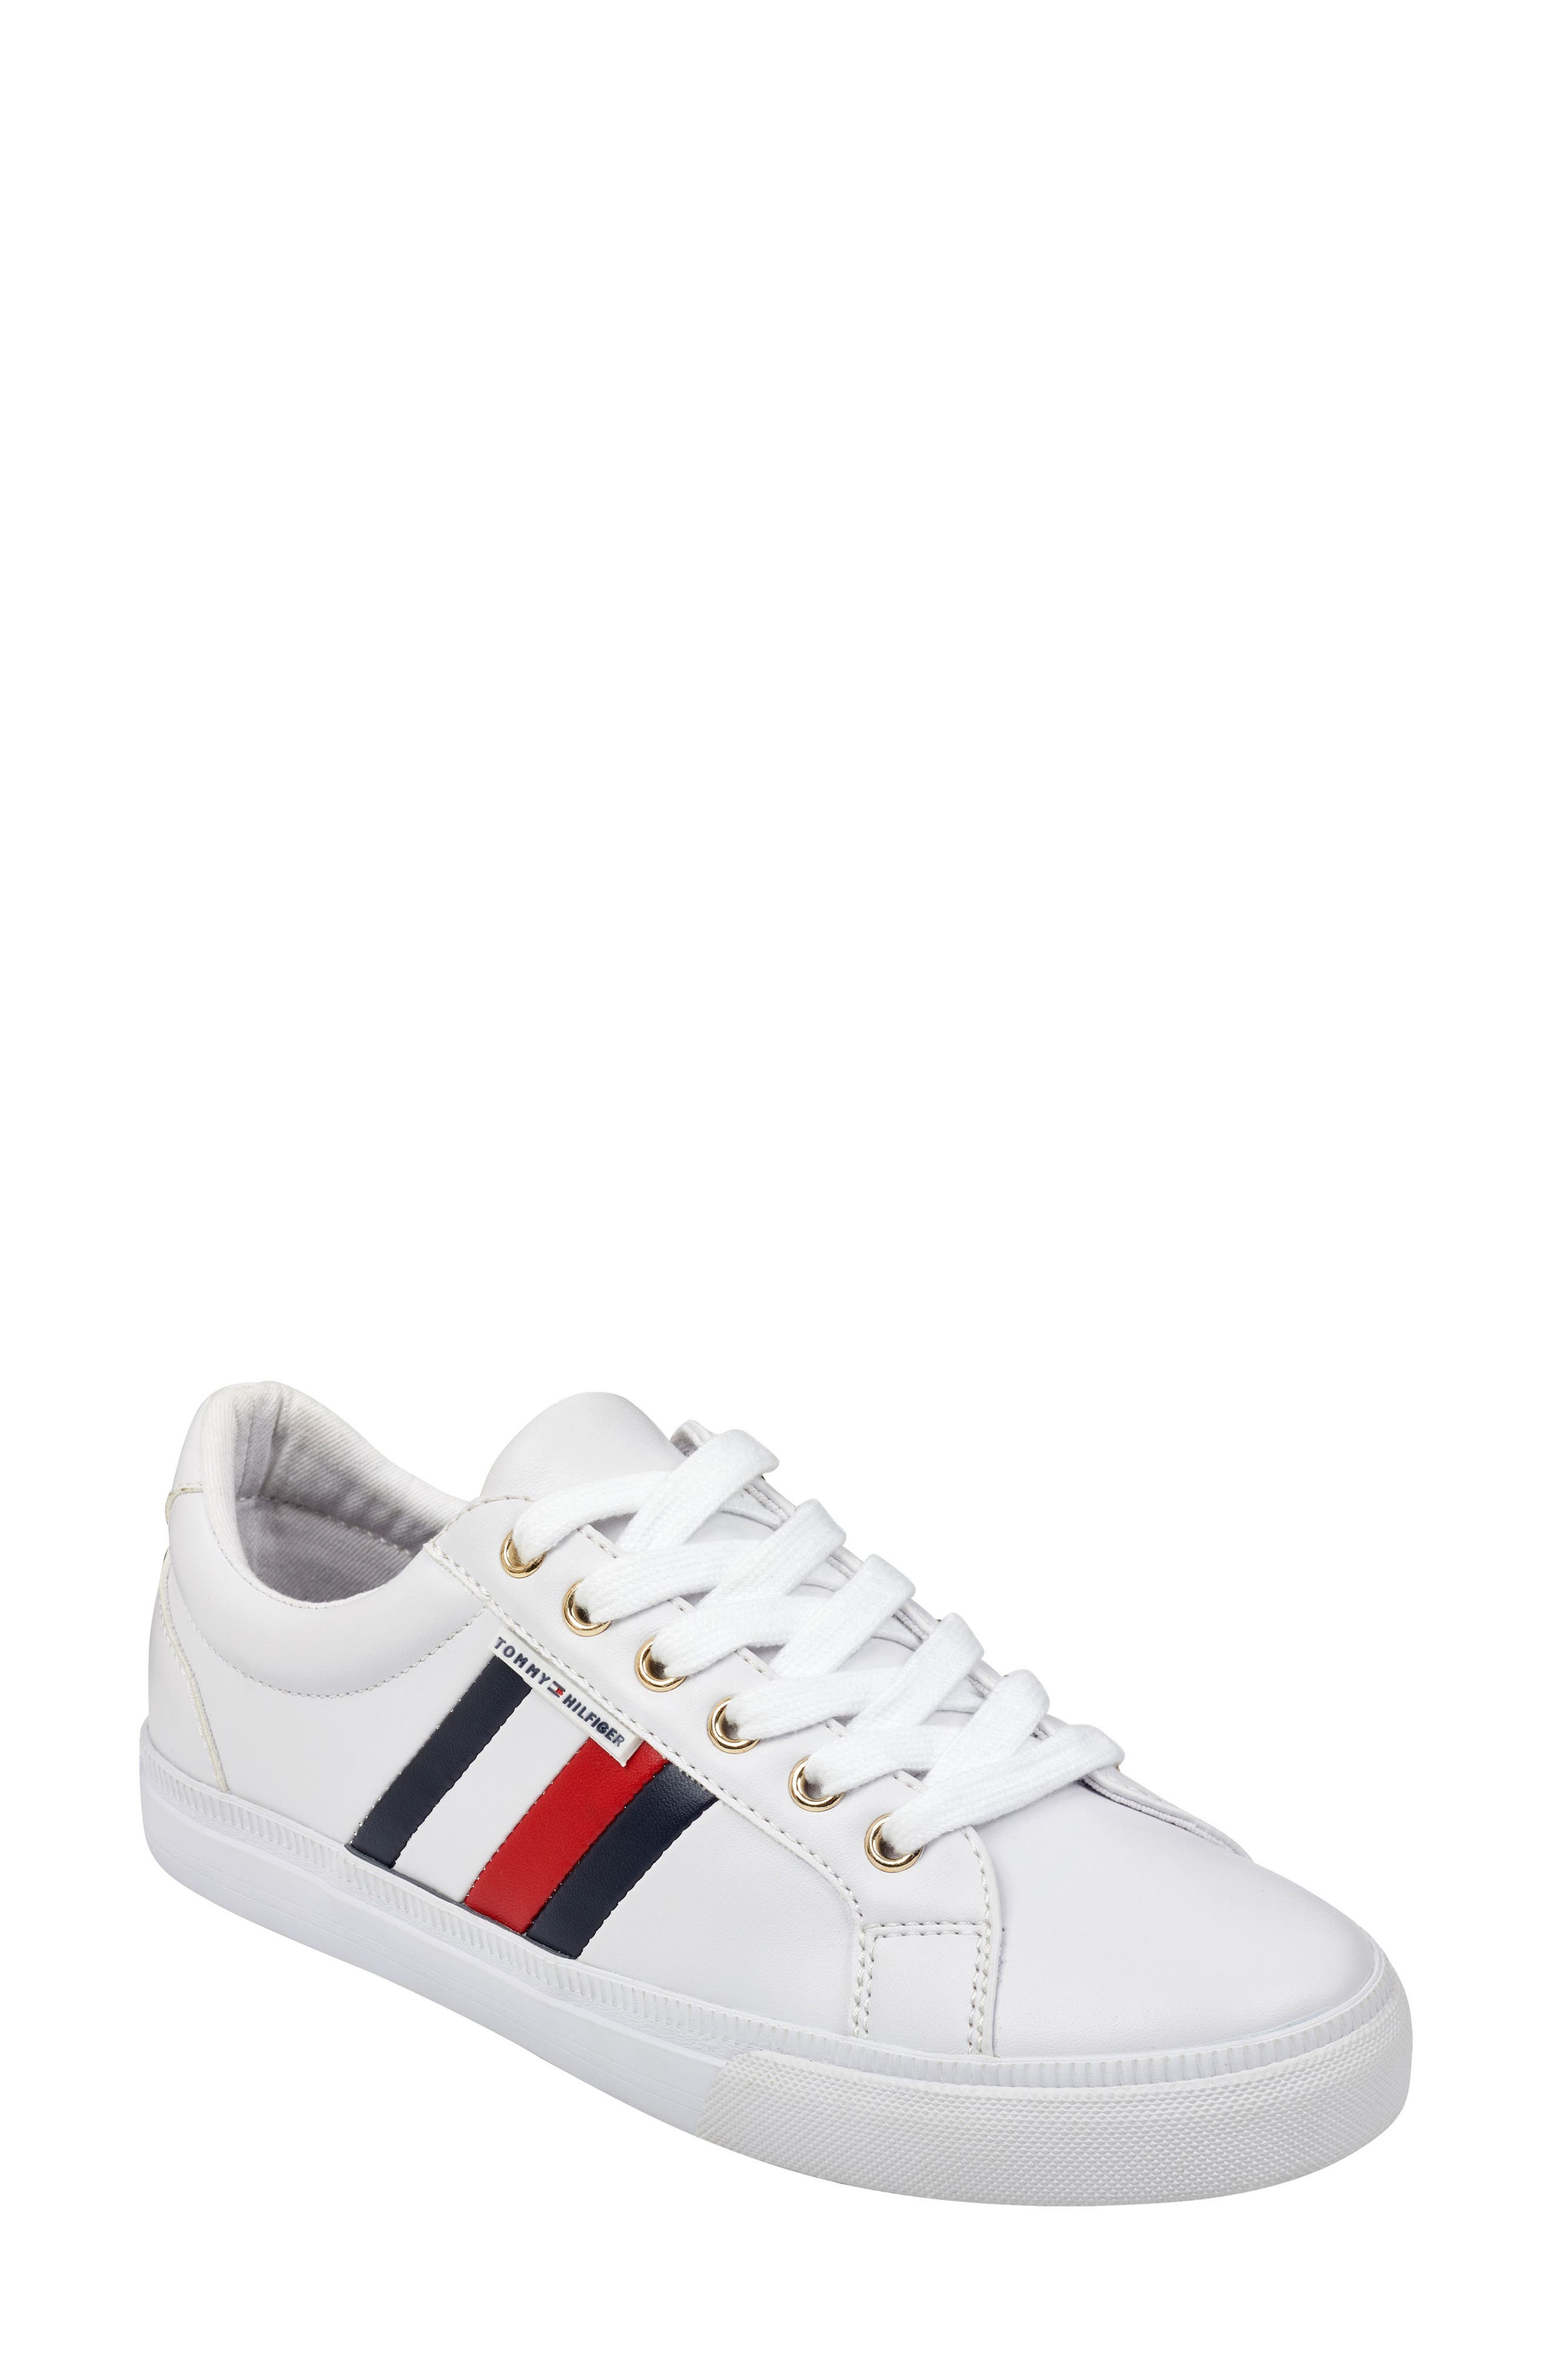 tommy hilfiger shoes new